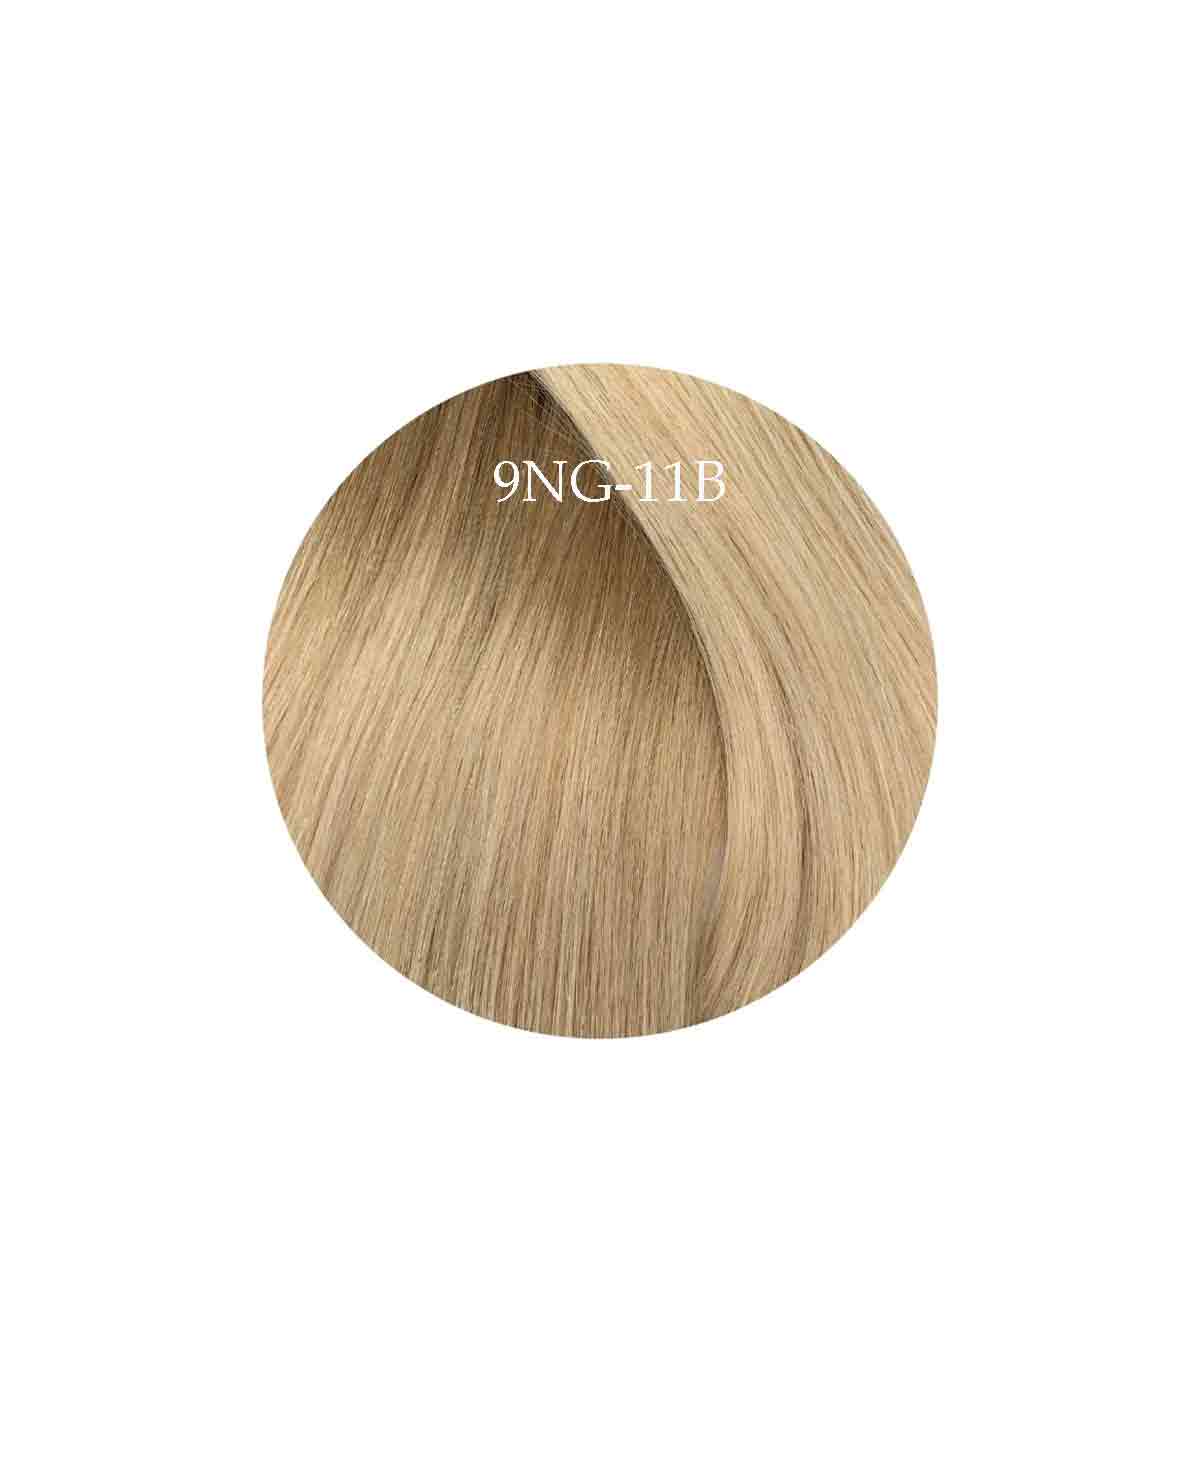 Showpony 45-50cm (20") Skin Weft Extensions - Ombre - 9NG-11B Sunshine Kiss 